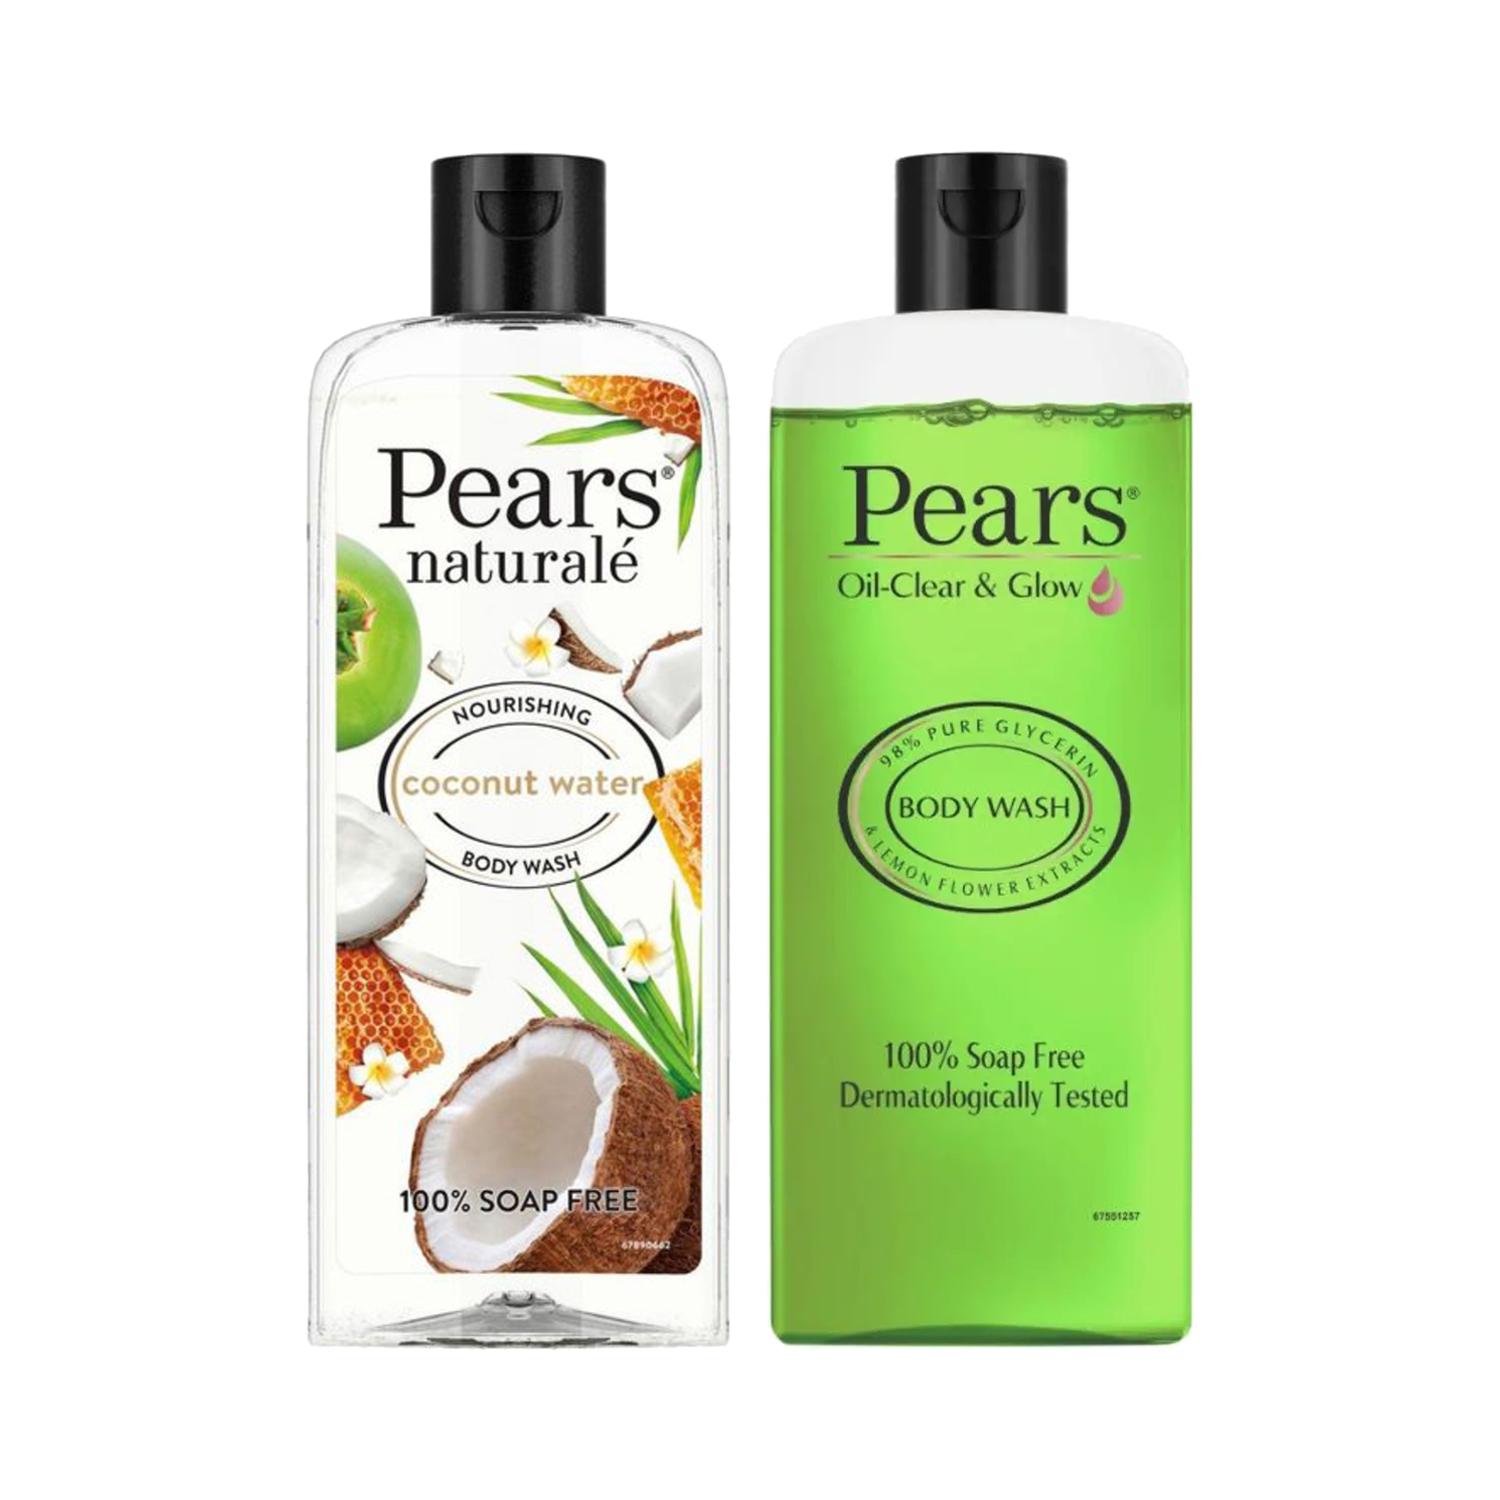 Pears | Pears Oil Clear & Glow And Naturale Nourishing Coconut Water Body Wash Combo